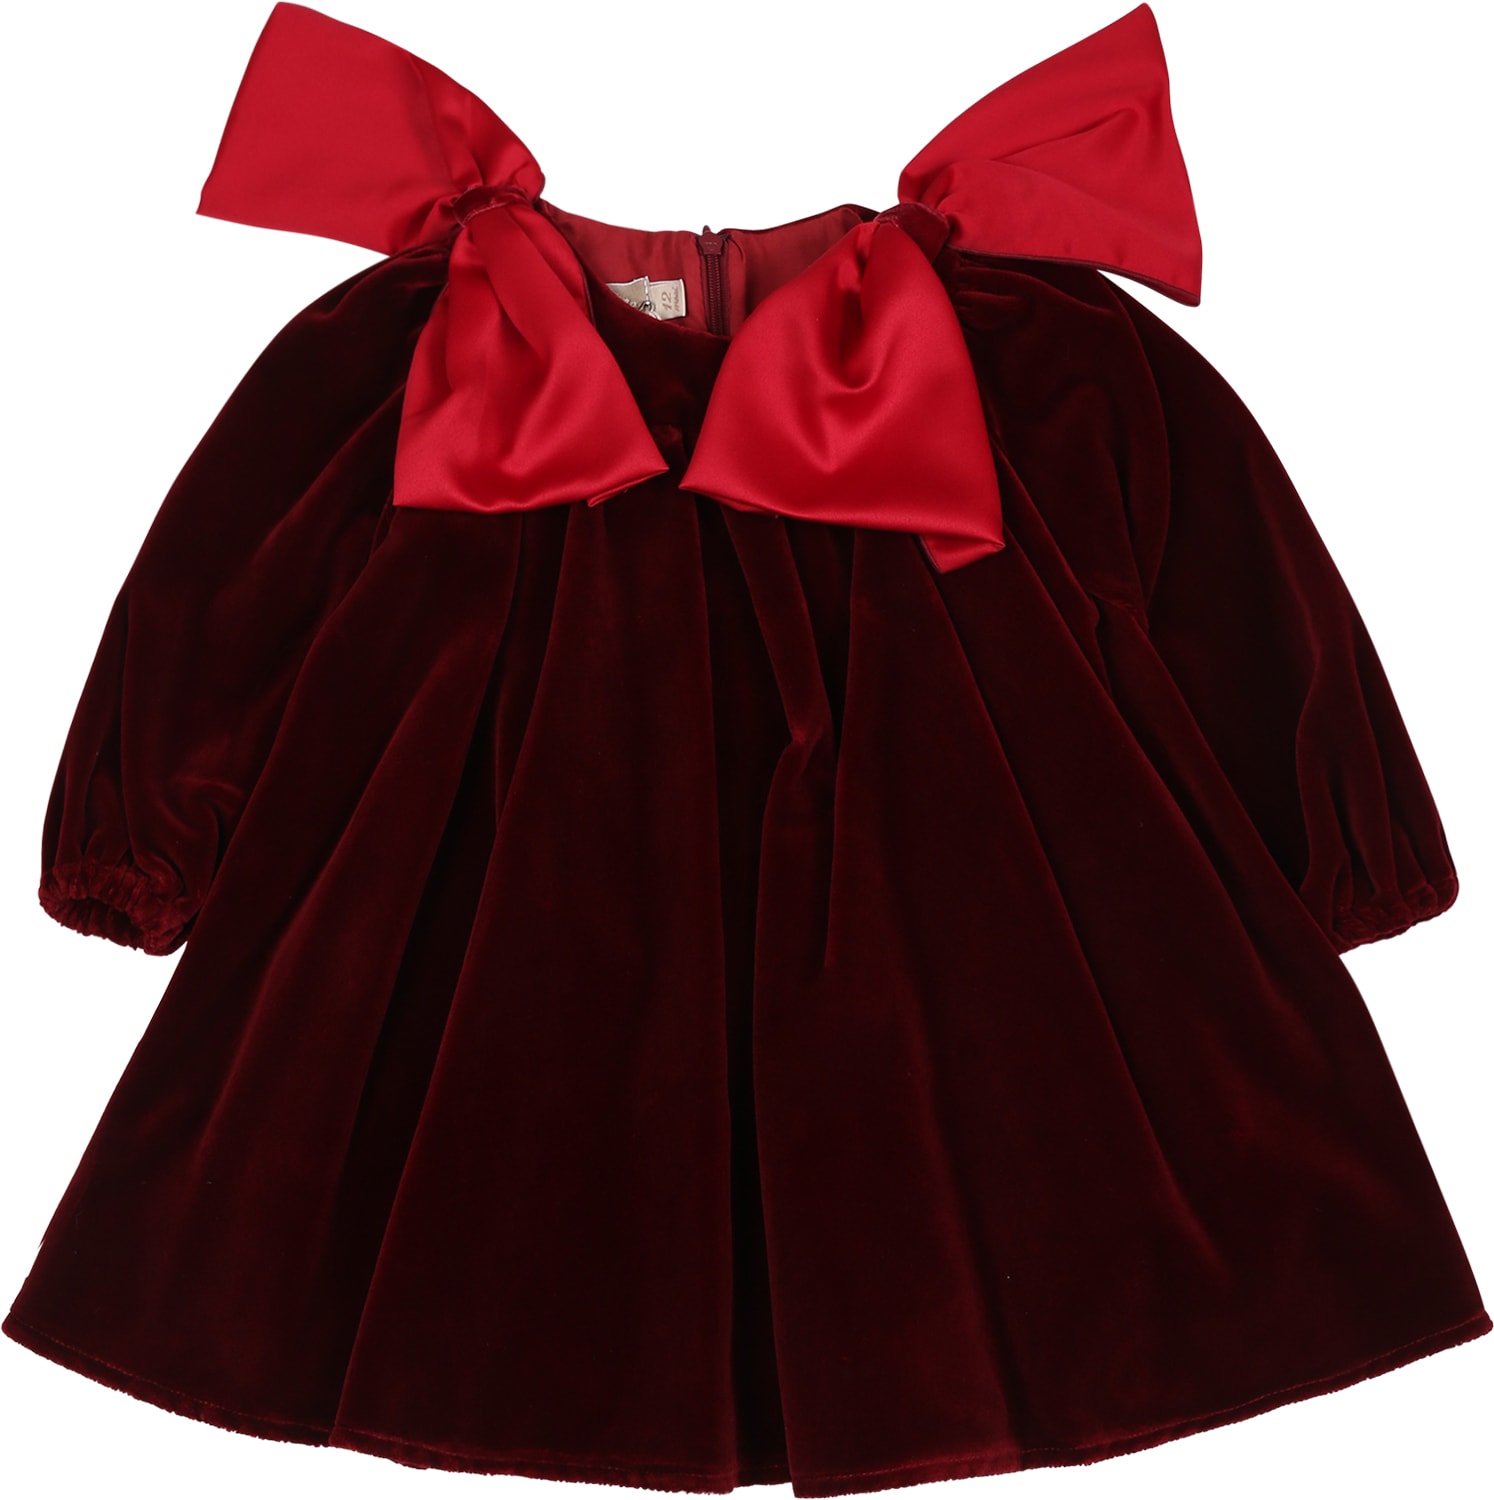 LA STUPENDERIA BURGUNDY DRESS FOR BABY GIRL WITH BOW